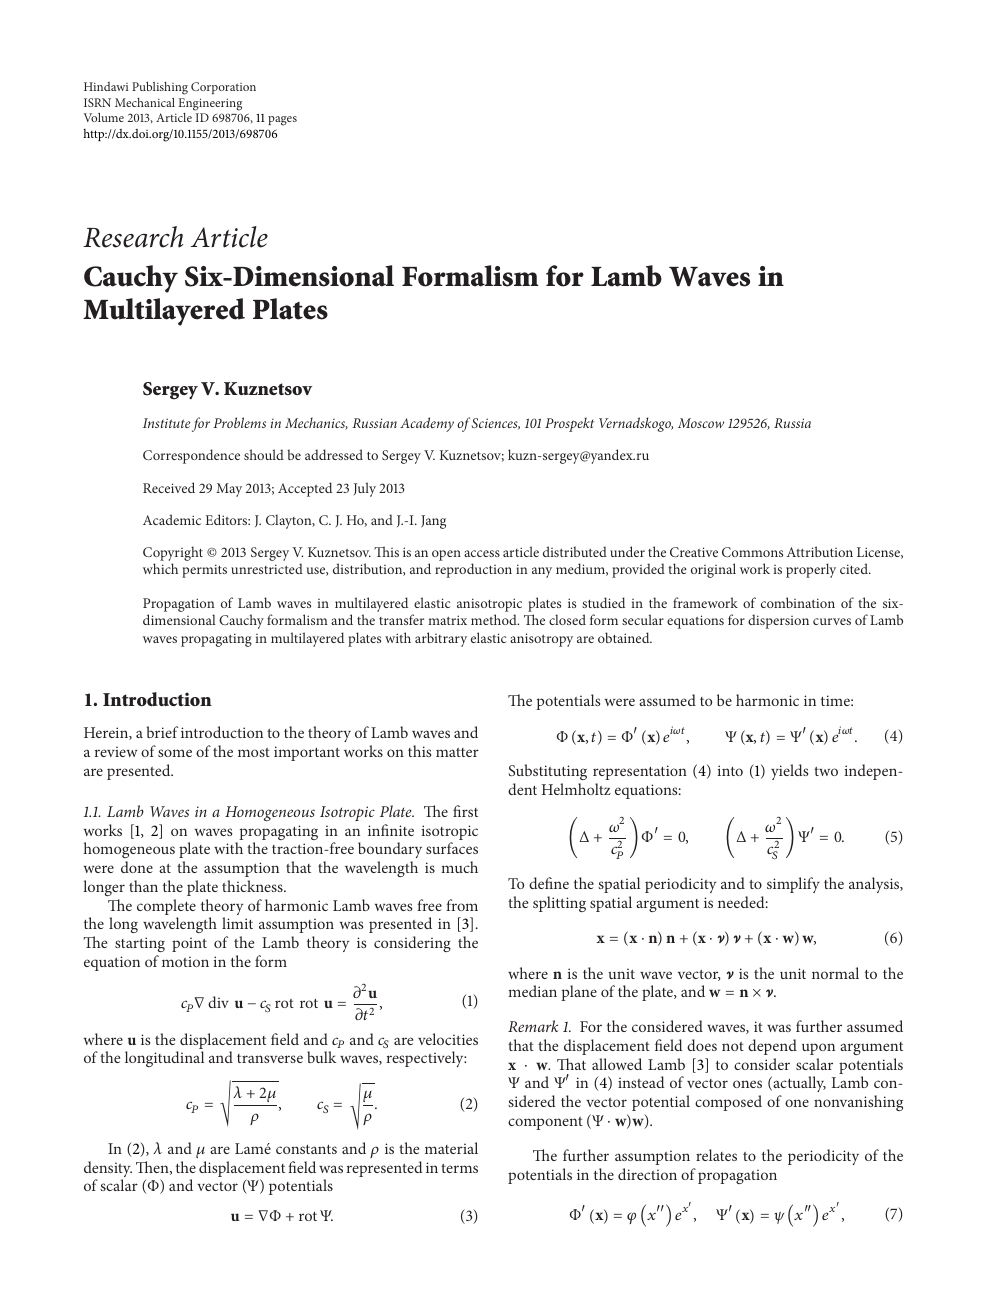 Cauchy Six Dimensional Formalism For Lamb Waves In Multilayered Plates Topic Of Research Paper In Mechanical Engineering Download Scholarly Article Pdf And Read For Free On Cyberleninka Open Science Hub